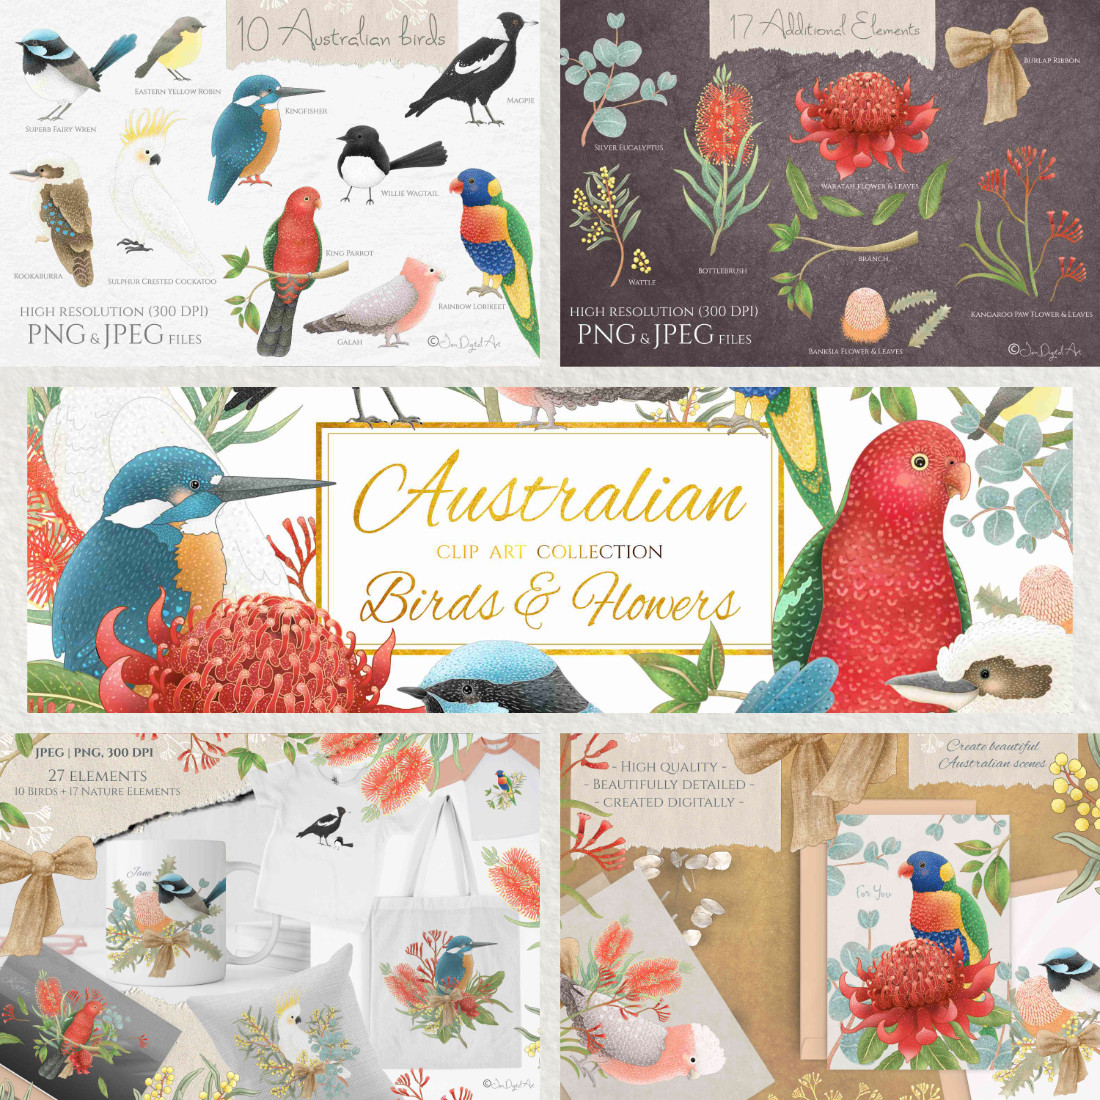 Amazing Australian Birds and Flowers Collection Clipart Design cover image.